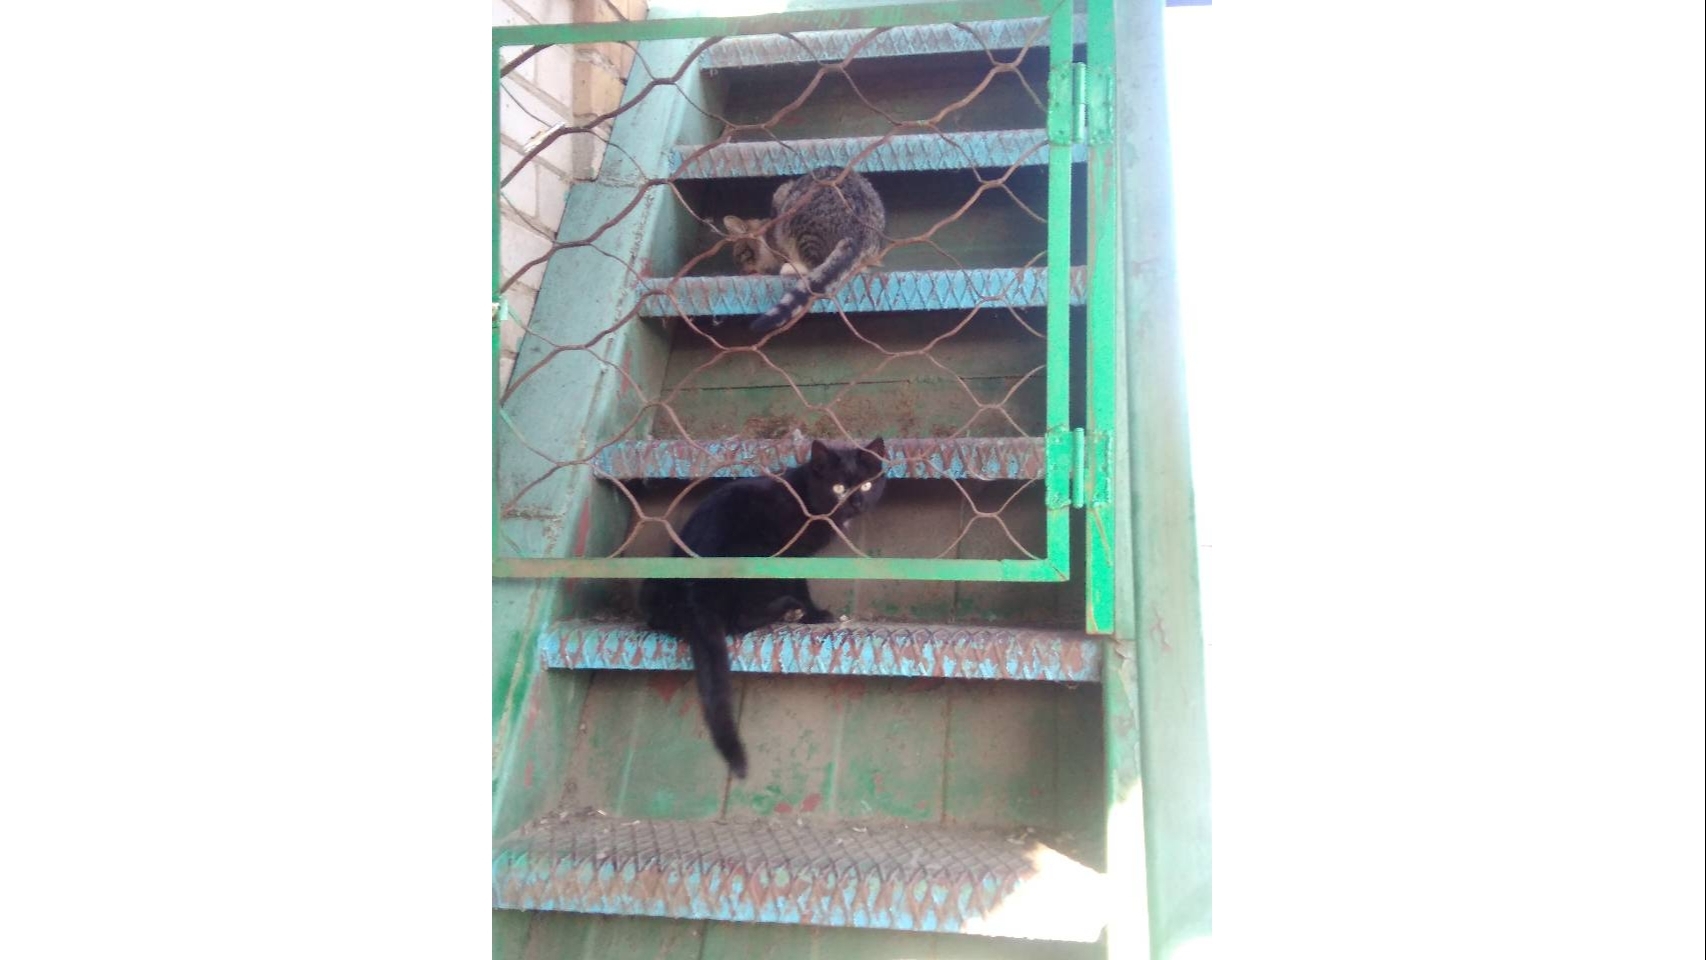 Food is needed: there are 30 cats that used to be pets living in cottages near Nikopol 